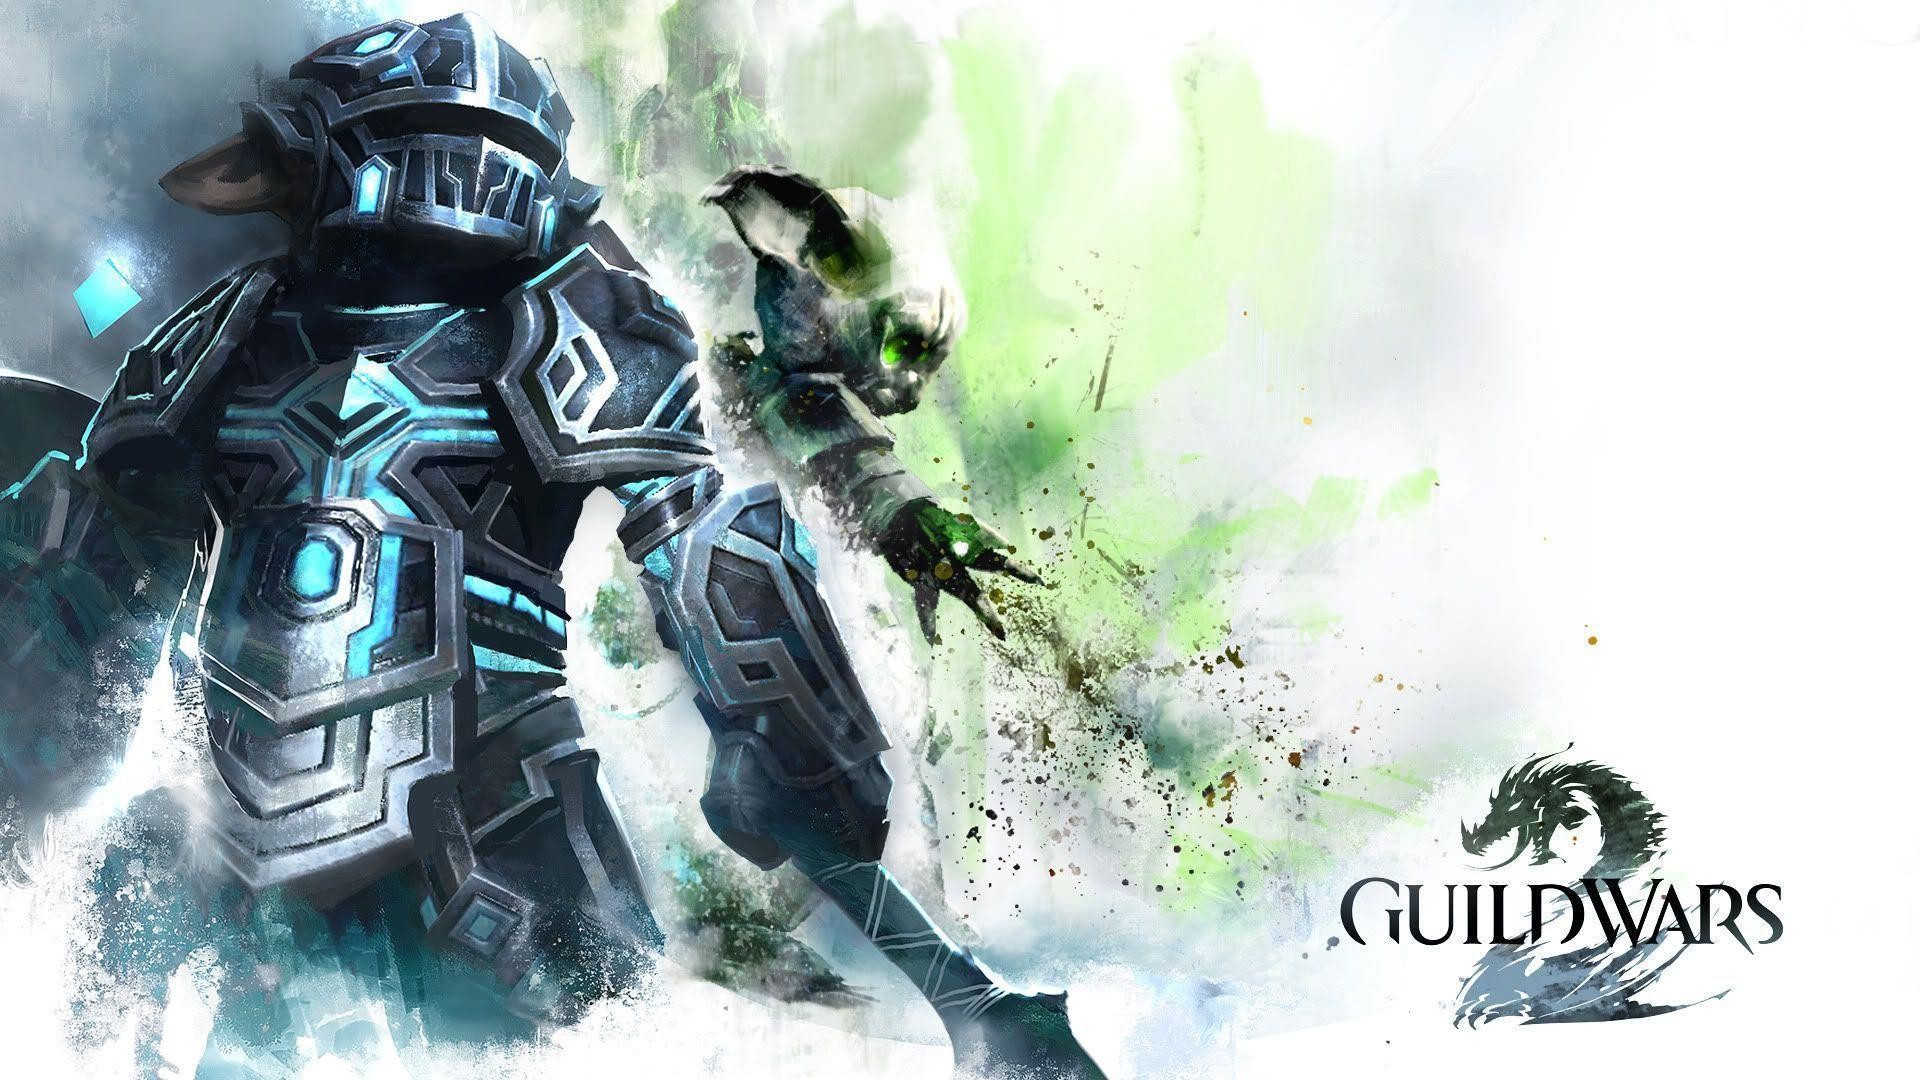 1920x1080 wallpaper request - Library of Whispers - Guild Wars 2 Guru